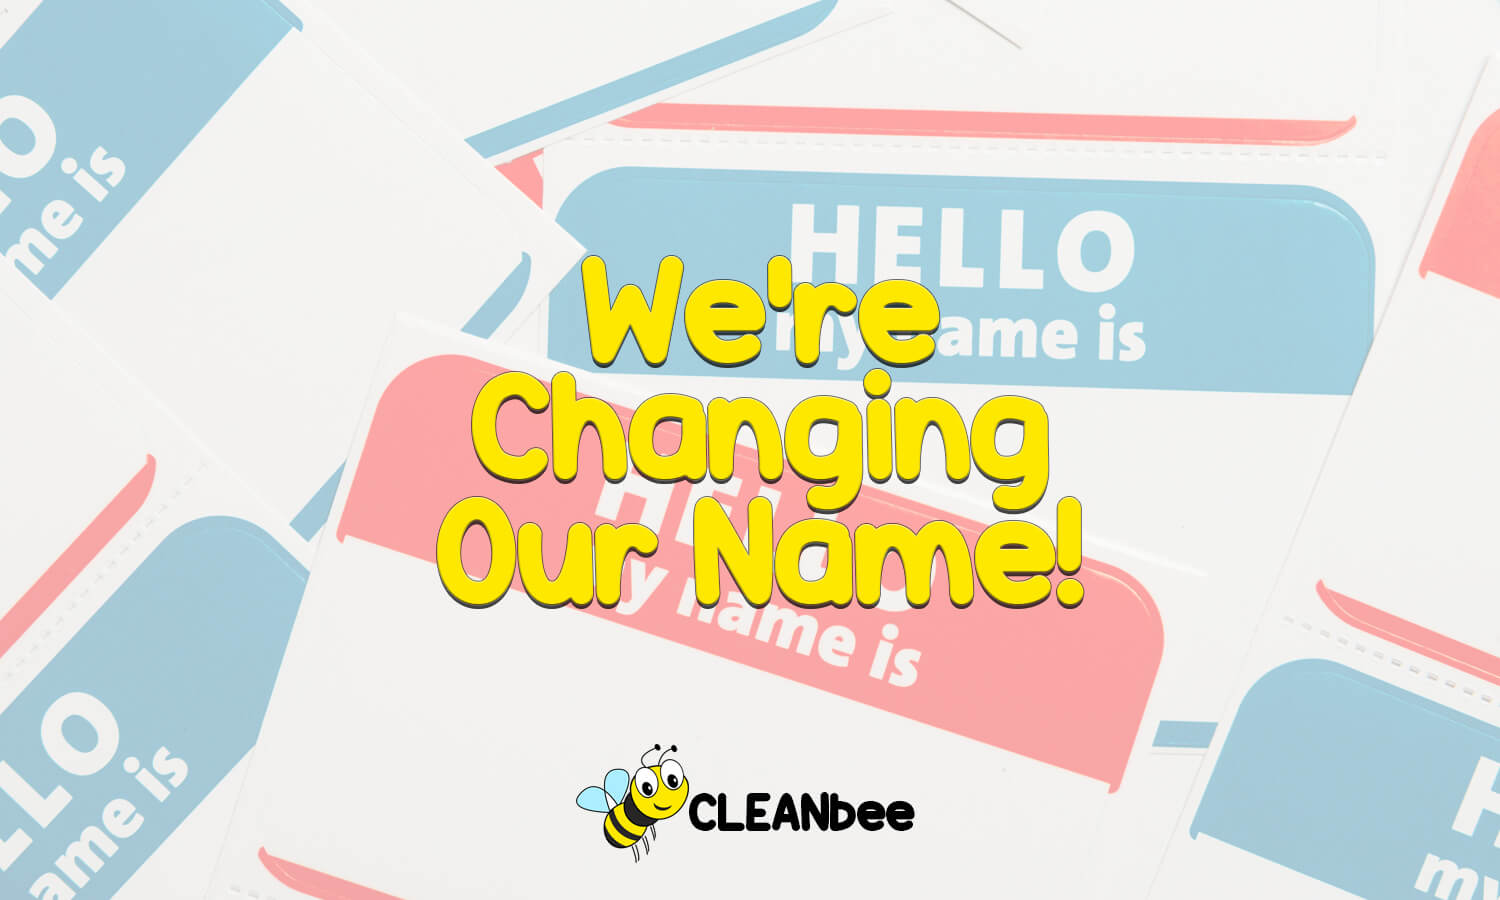 We're Changing Our Name